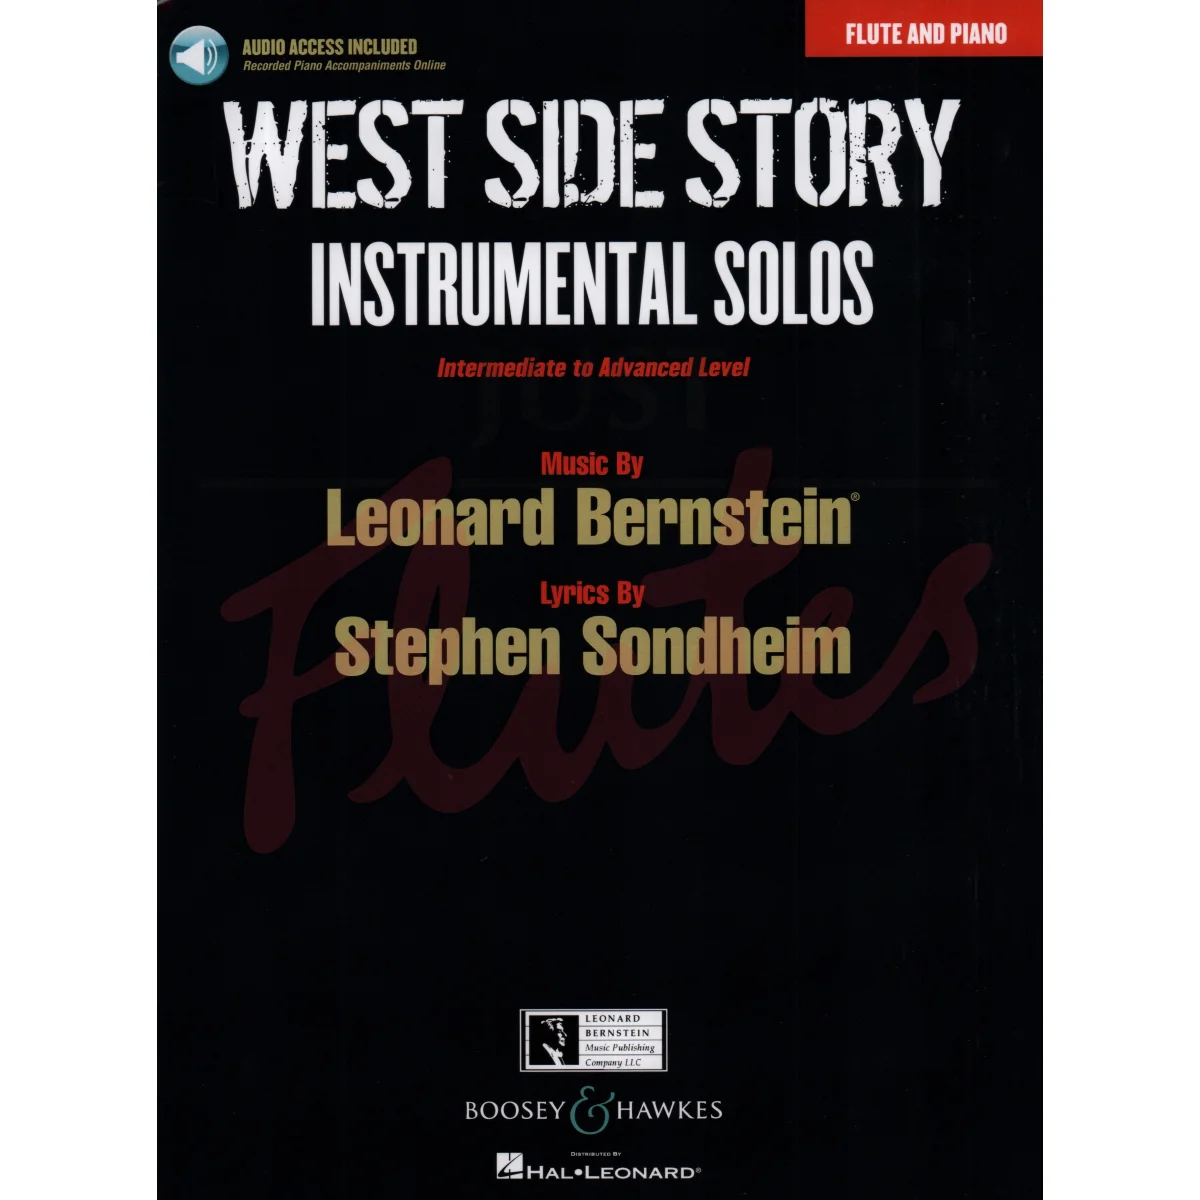 West Side Story Instrumental Solos for Flute and Piano